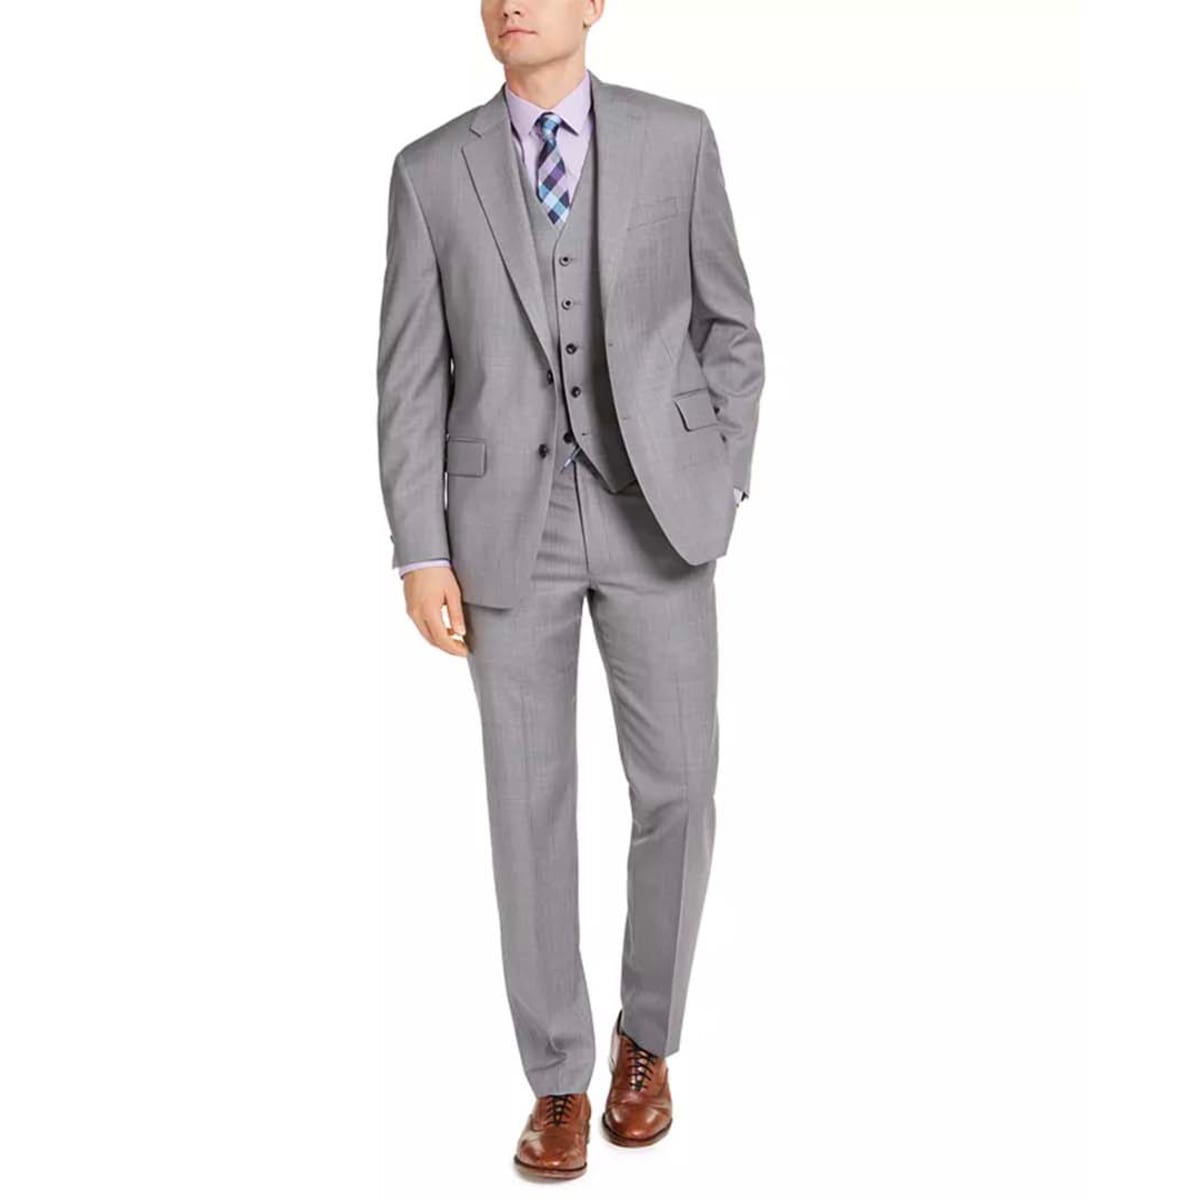 Pick up This Michael Kors Modern-Fit Suit at Black Friday Prices - Men's  Journal